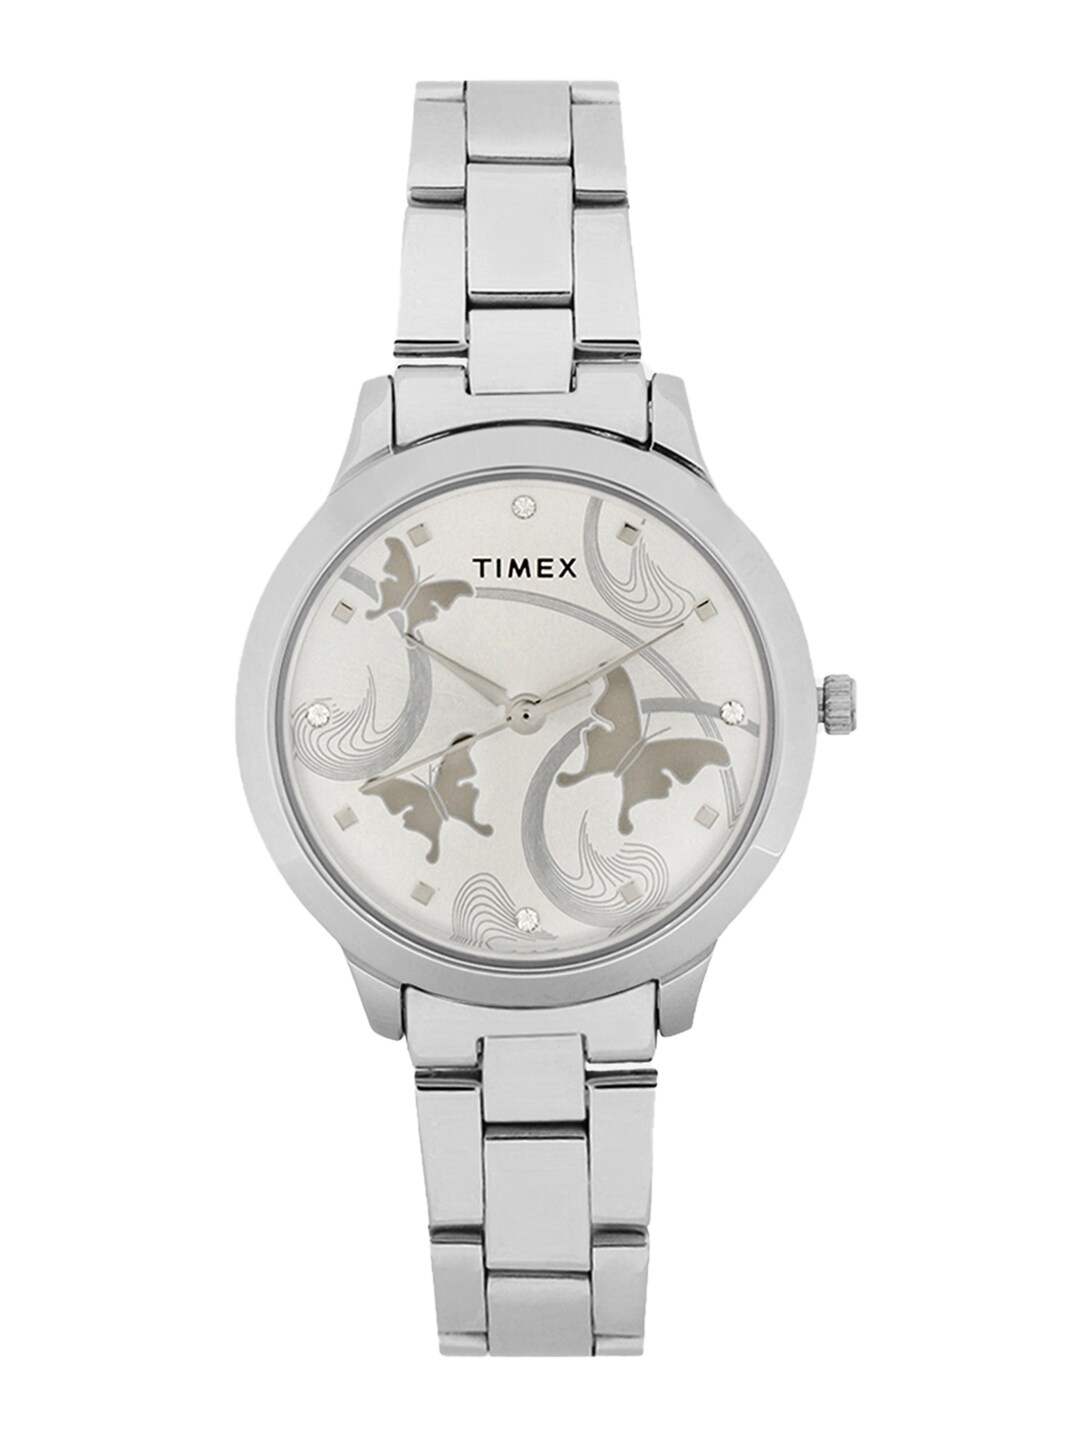 Timex Women Silver-Toned Analogue Watch - TW000T606